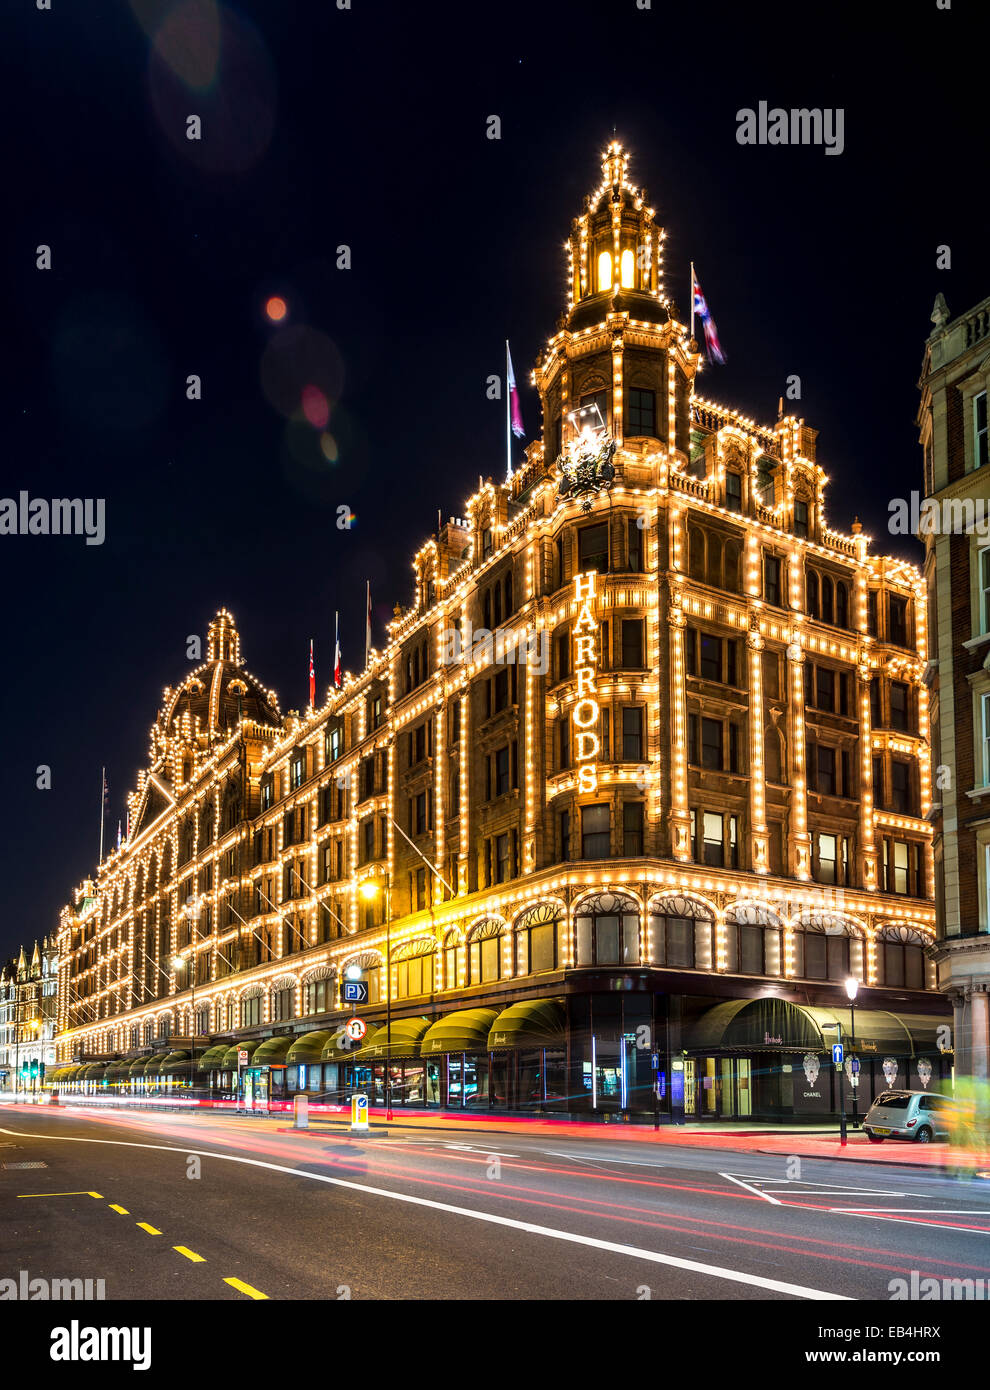 Harrods is a world famous department store in Kinightsbridge; it is lit up spectacularly at night Stock Photo